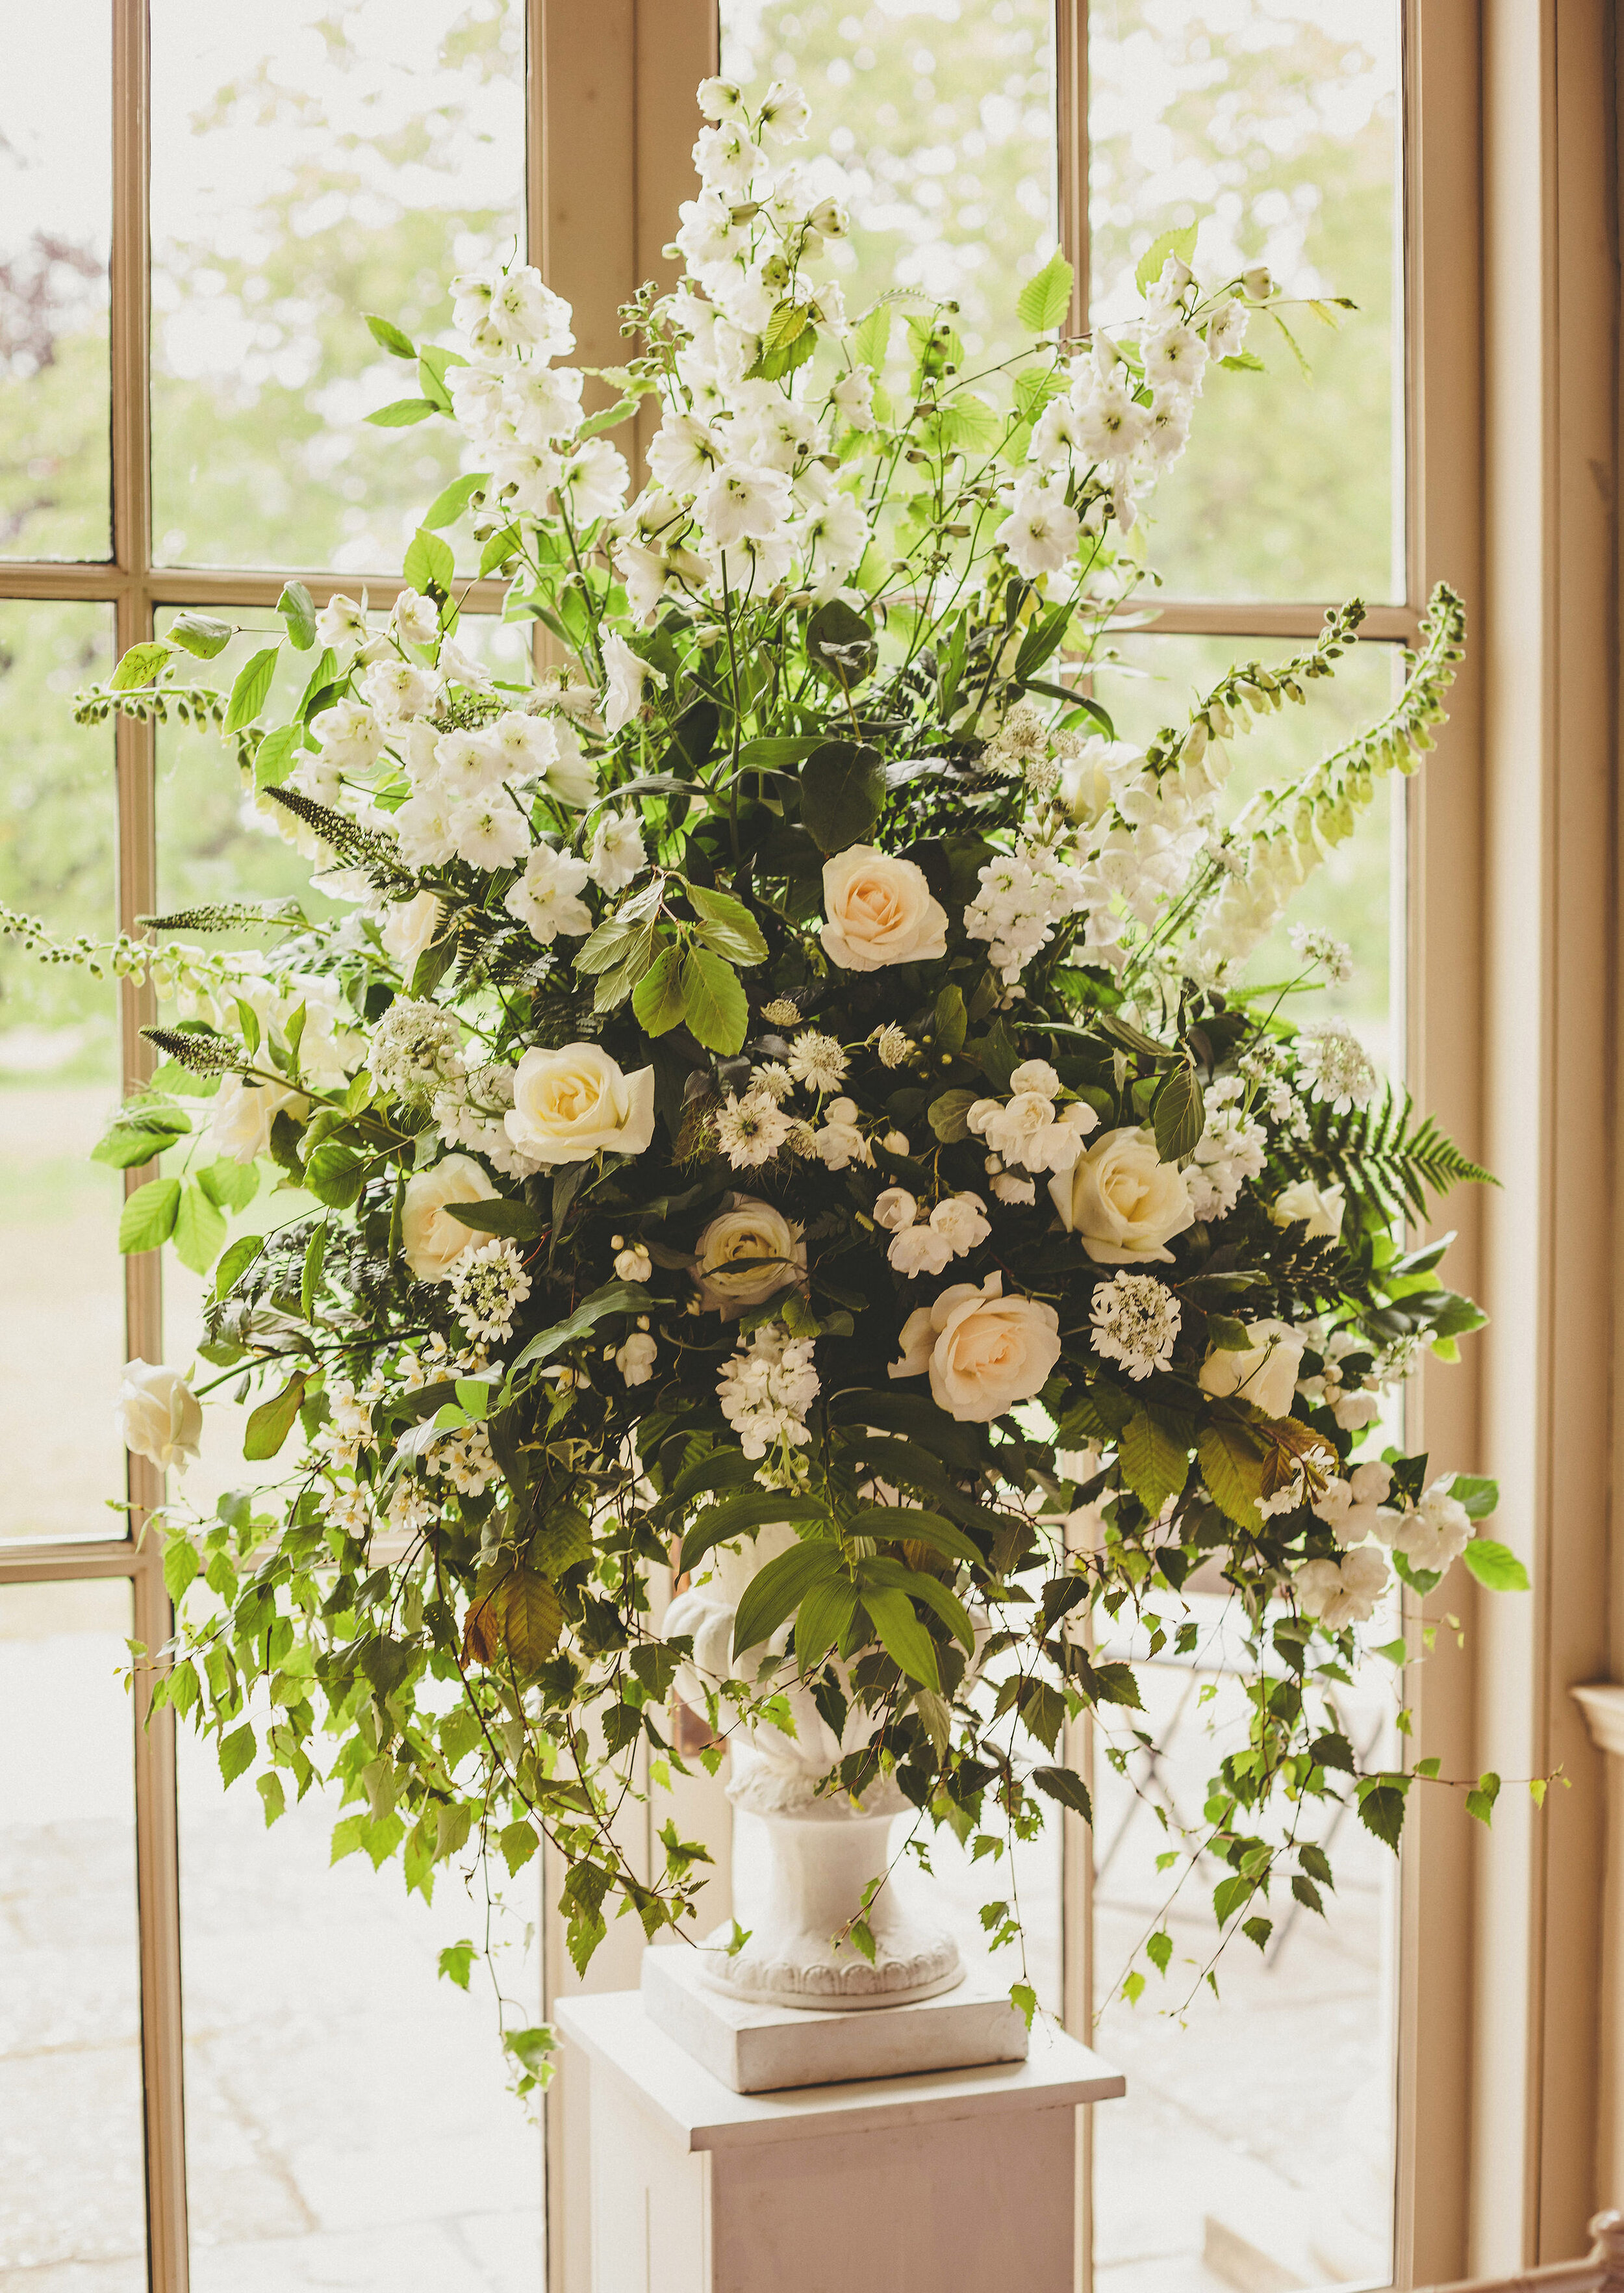  White and green floral pedestal arrangement for wedding by All Bunched Up Florists at Stubton Hall, Newark, Nottinghamshire. 